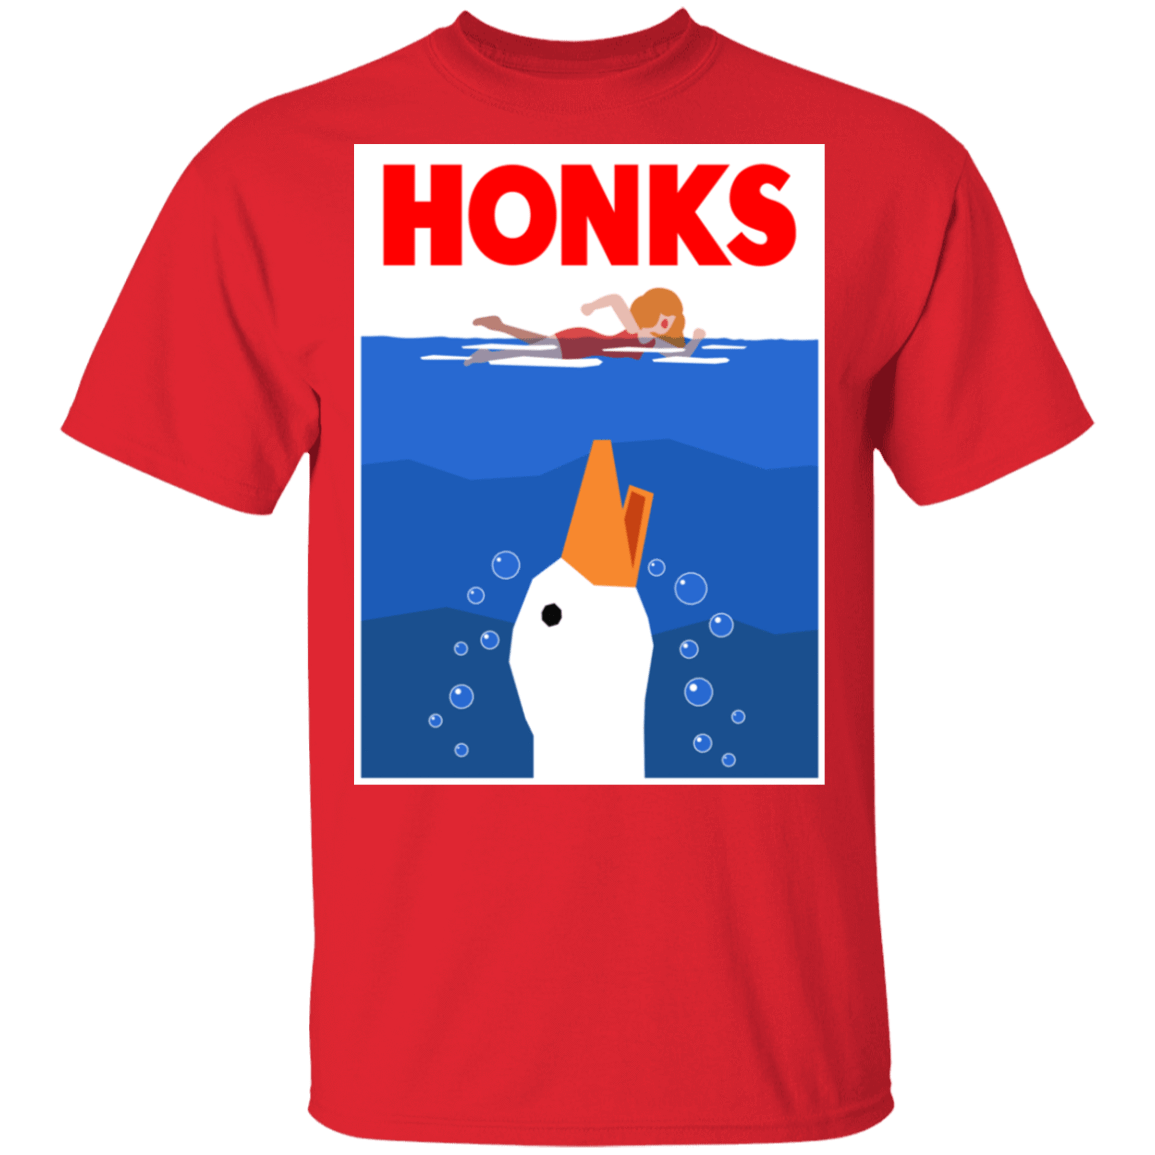 T-Shirts Red / S Honks T-Shirt